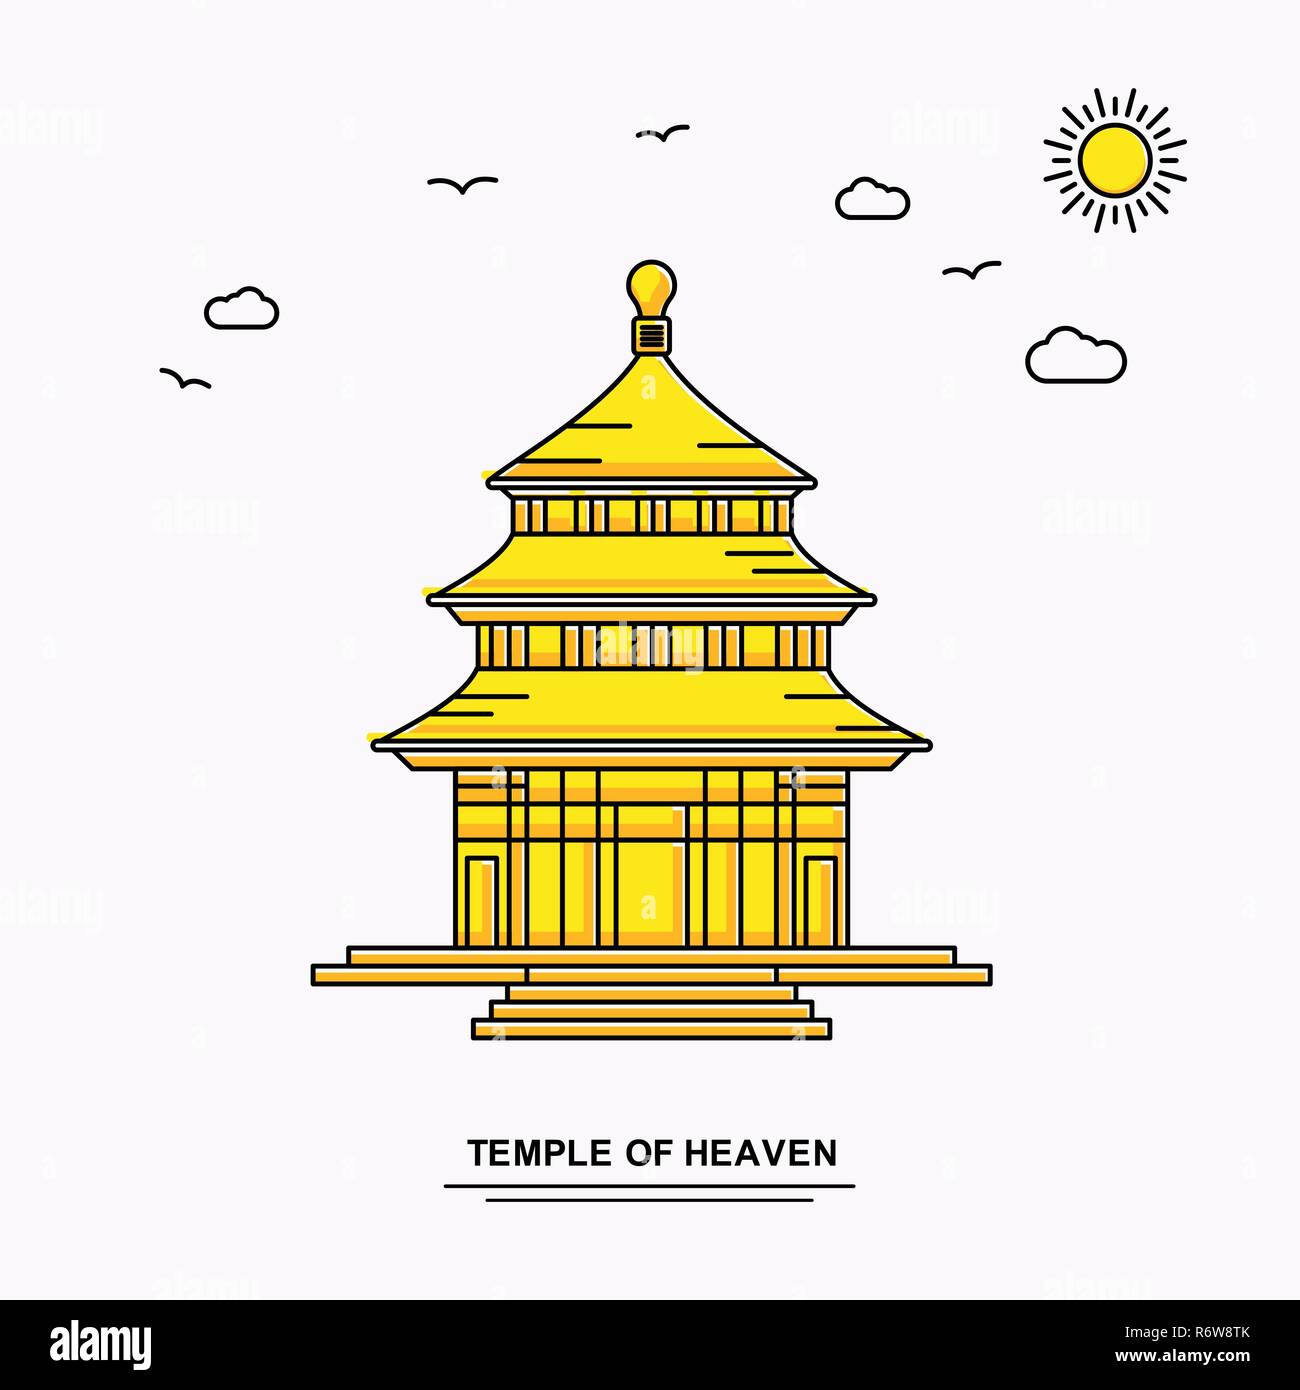 TEMPLE OF HEAVEN Monument Poster Template. World Travel Yellow illustration Background in Line Style with beauture nature Scene Stock Vector